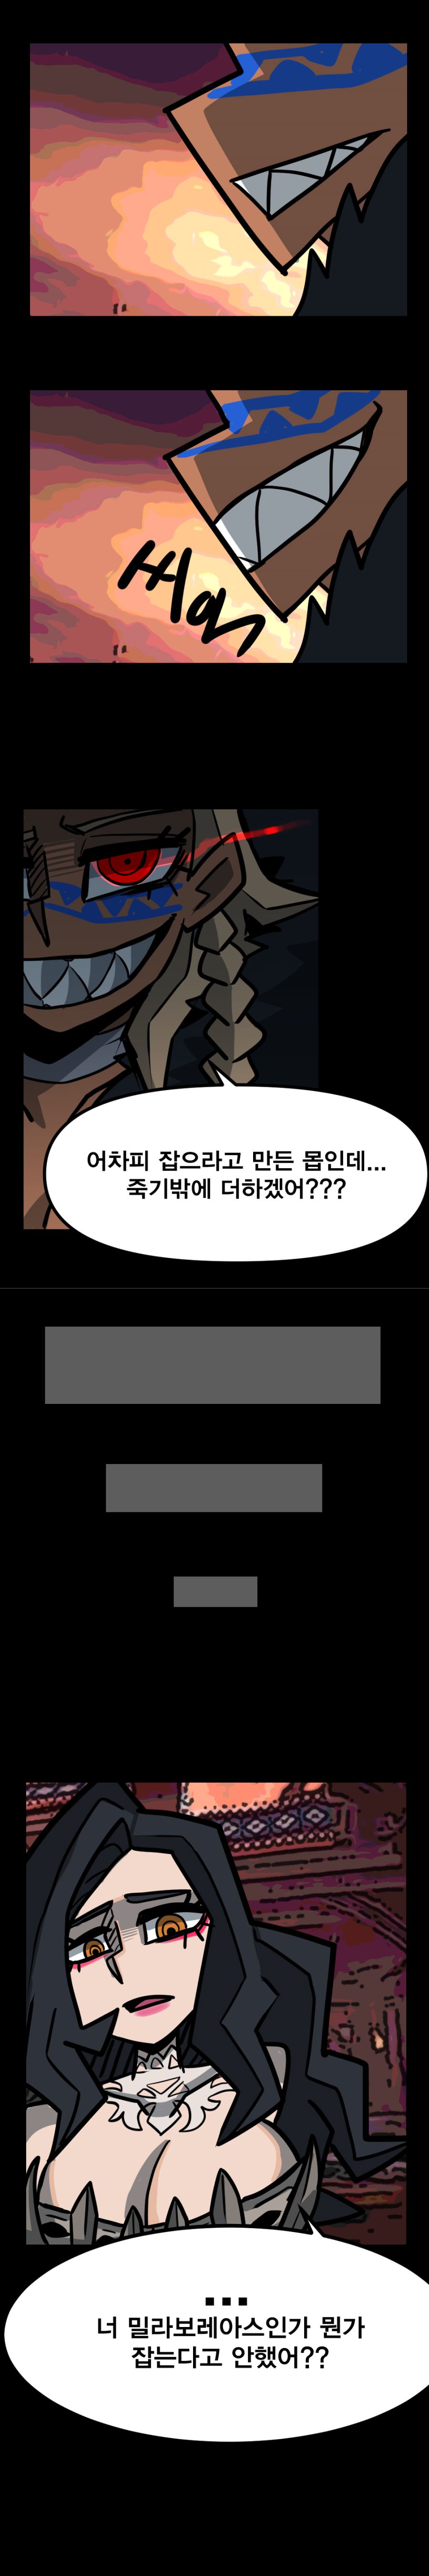 mh1-2완성.png